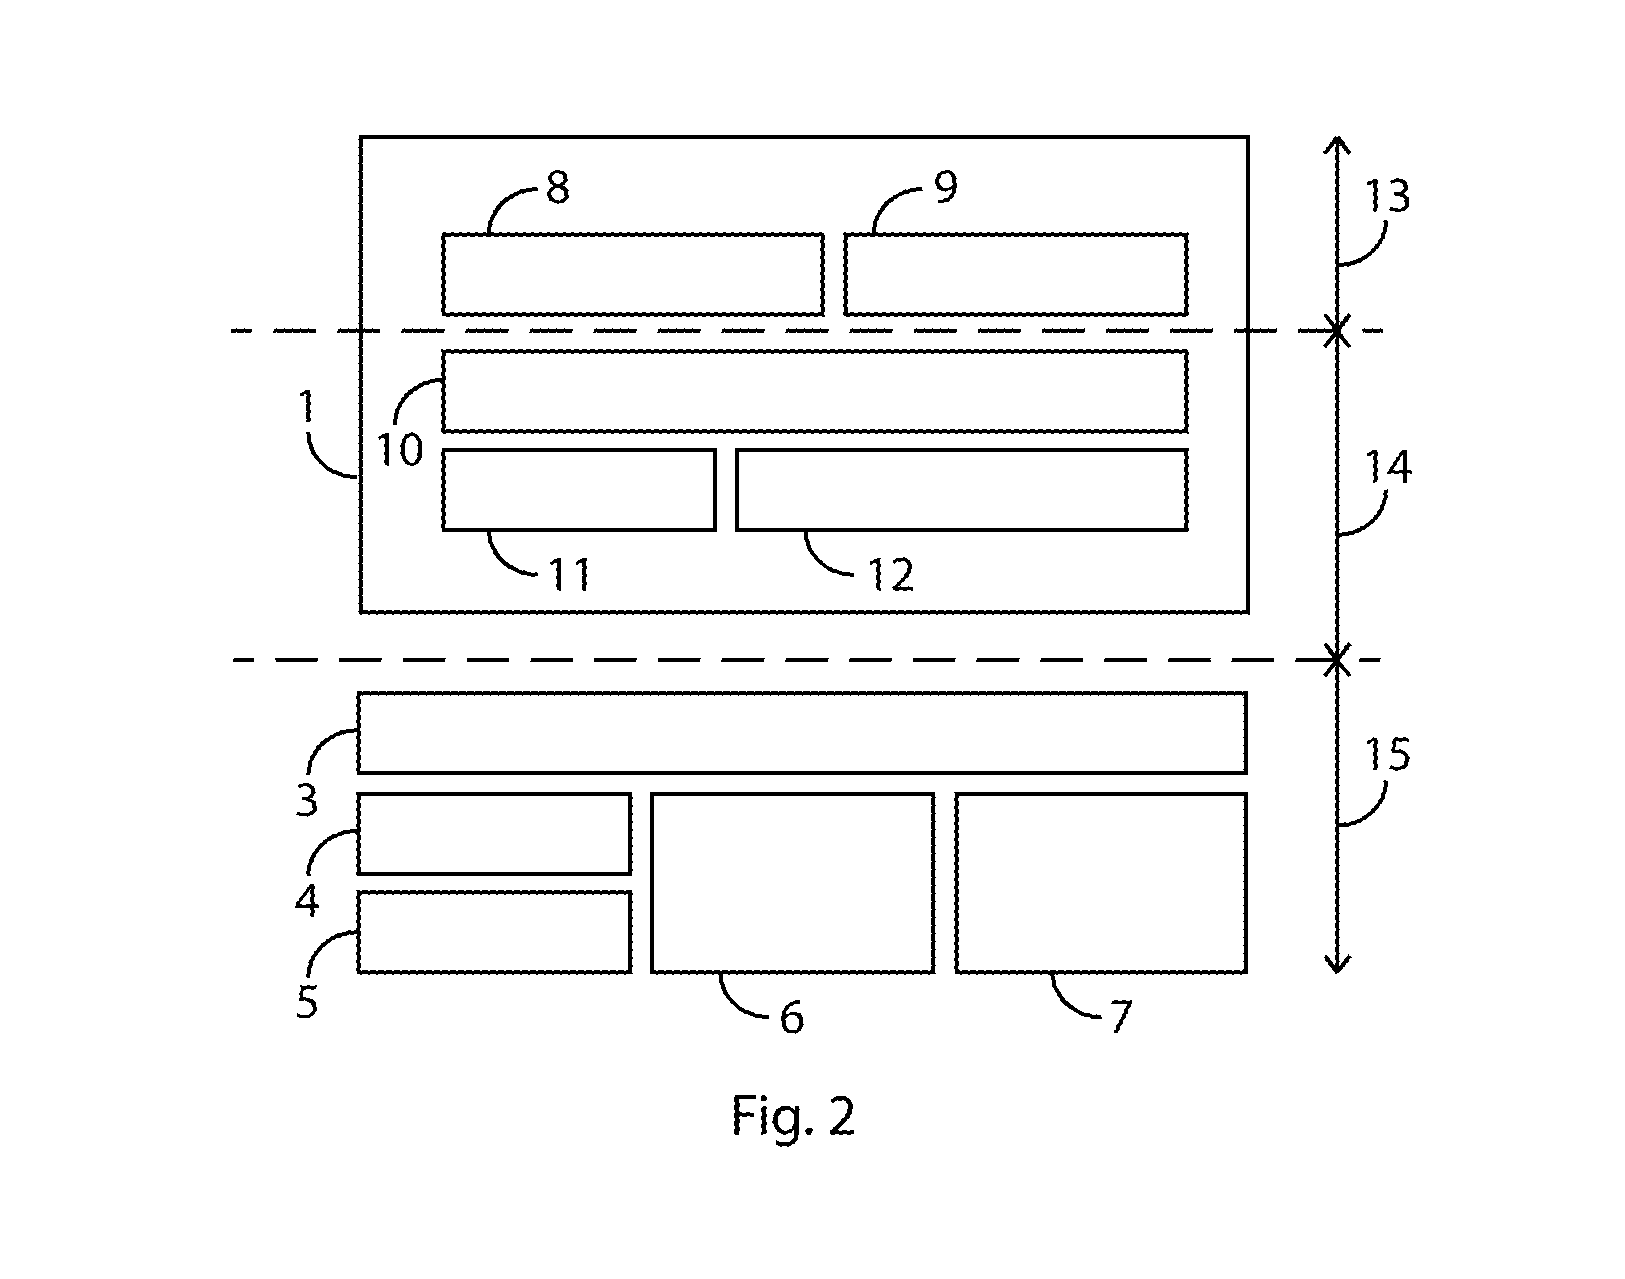 Method and system of caching web content in a hard disk